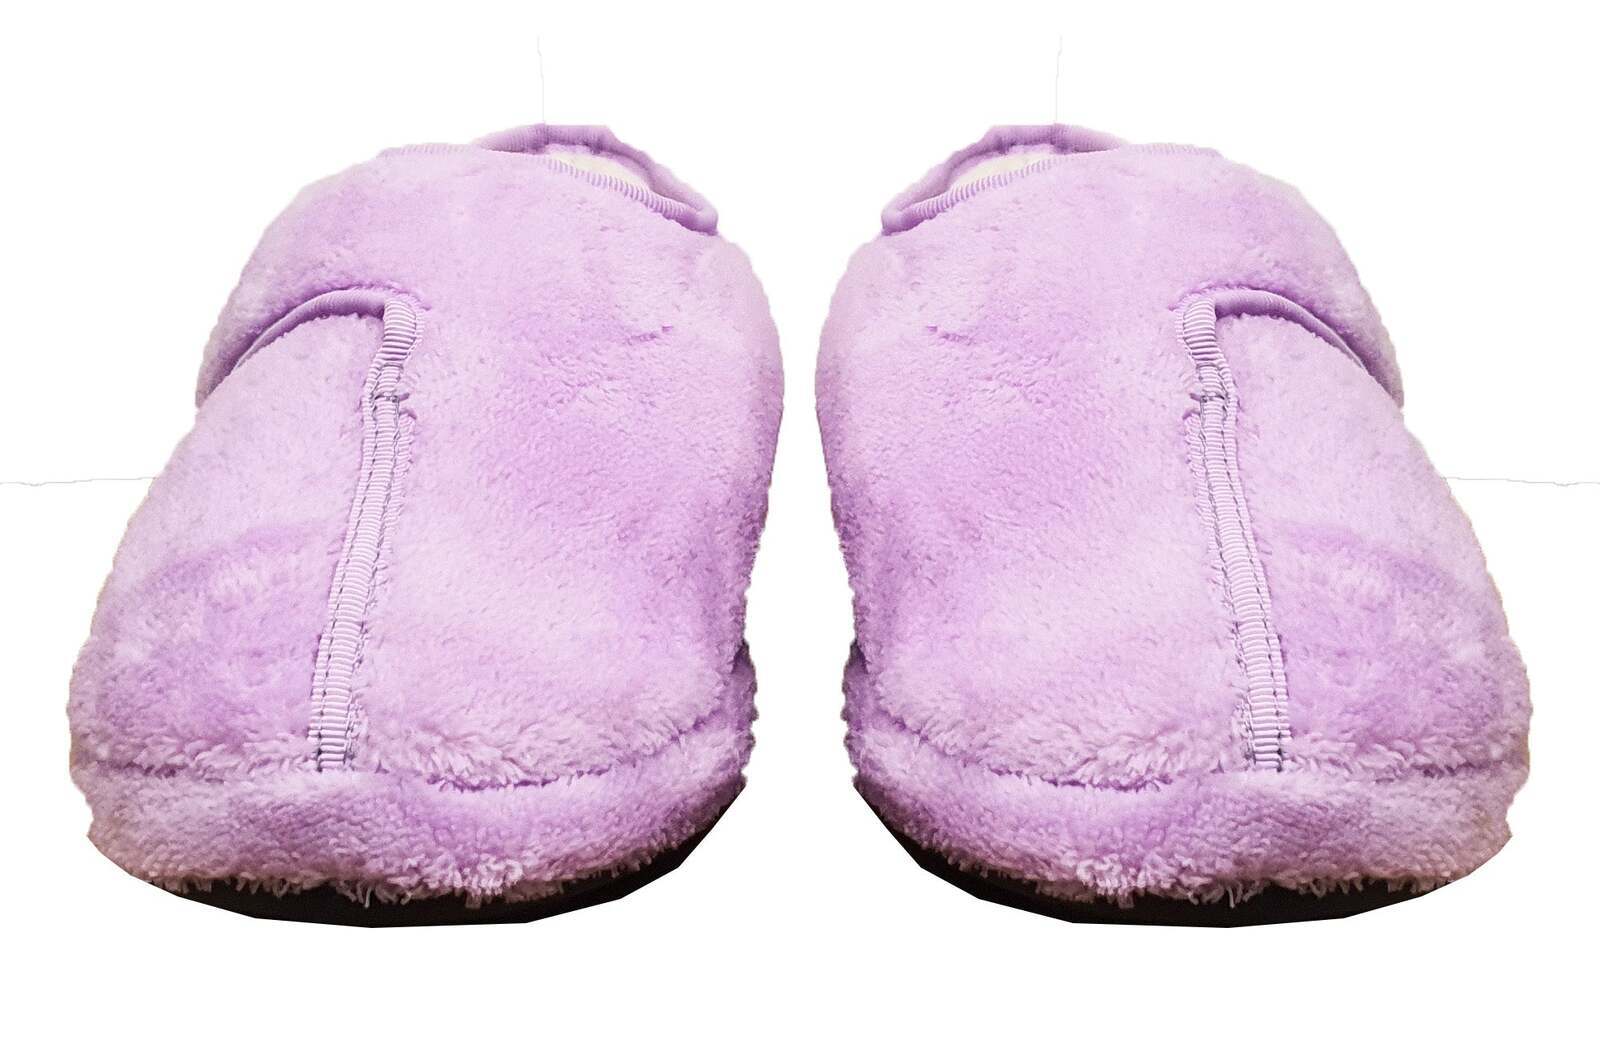 ARCHLINE Orthotic Plus Slippers Closed Scuffs Pain Relief Moccasins - Lilac - EU 40